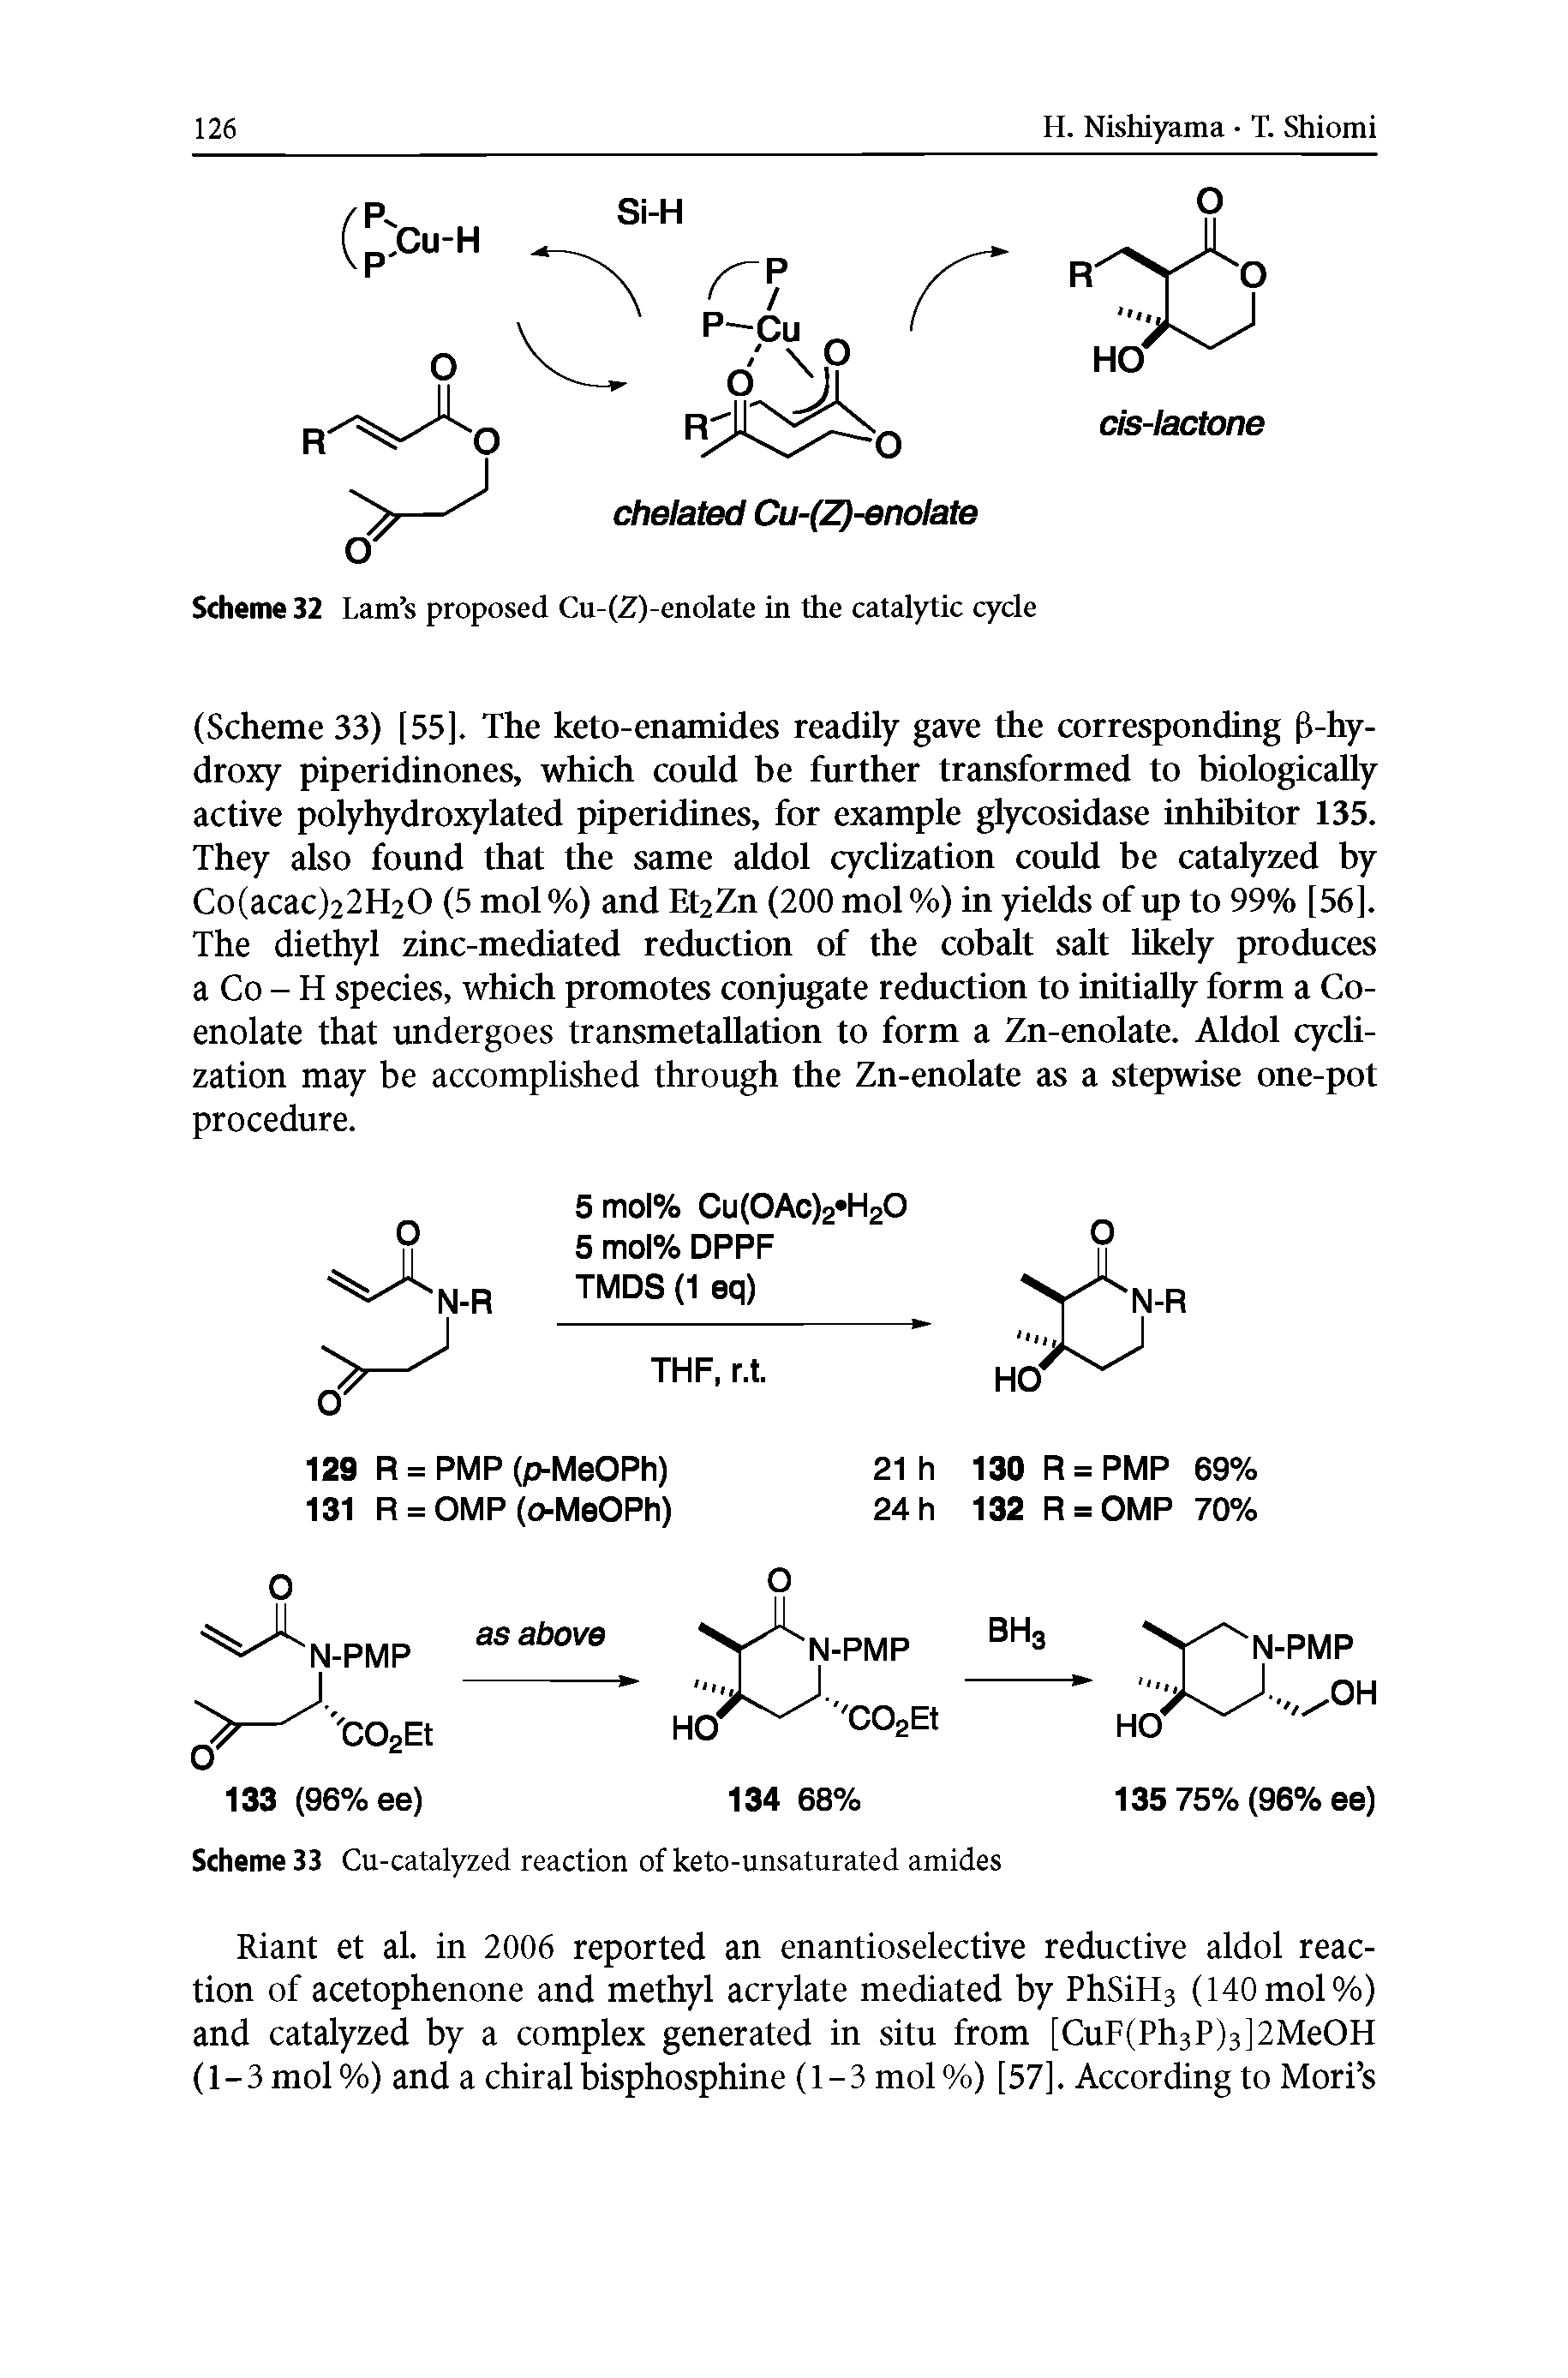 Scheme 33 Cu-catalyzed reaction of keto-unsaturated amides...